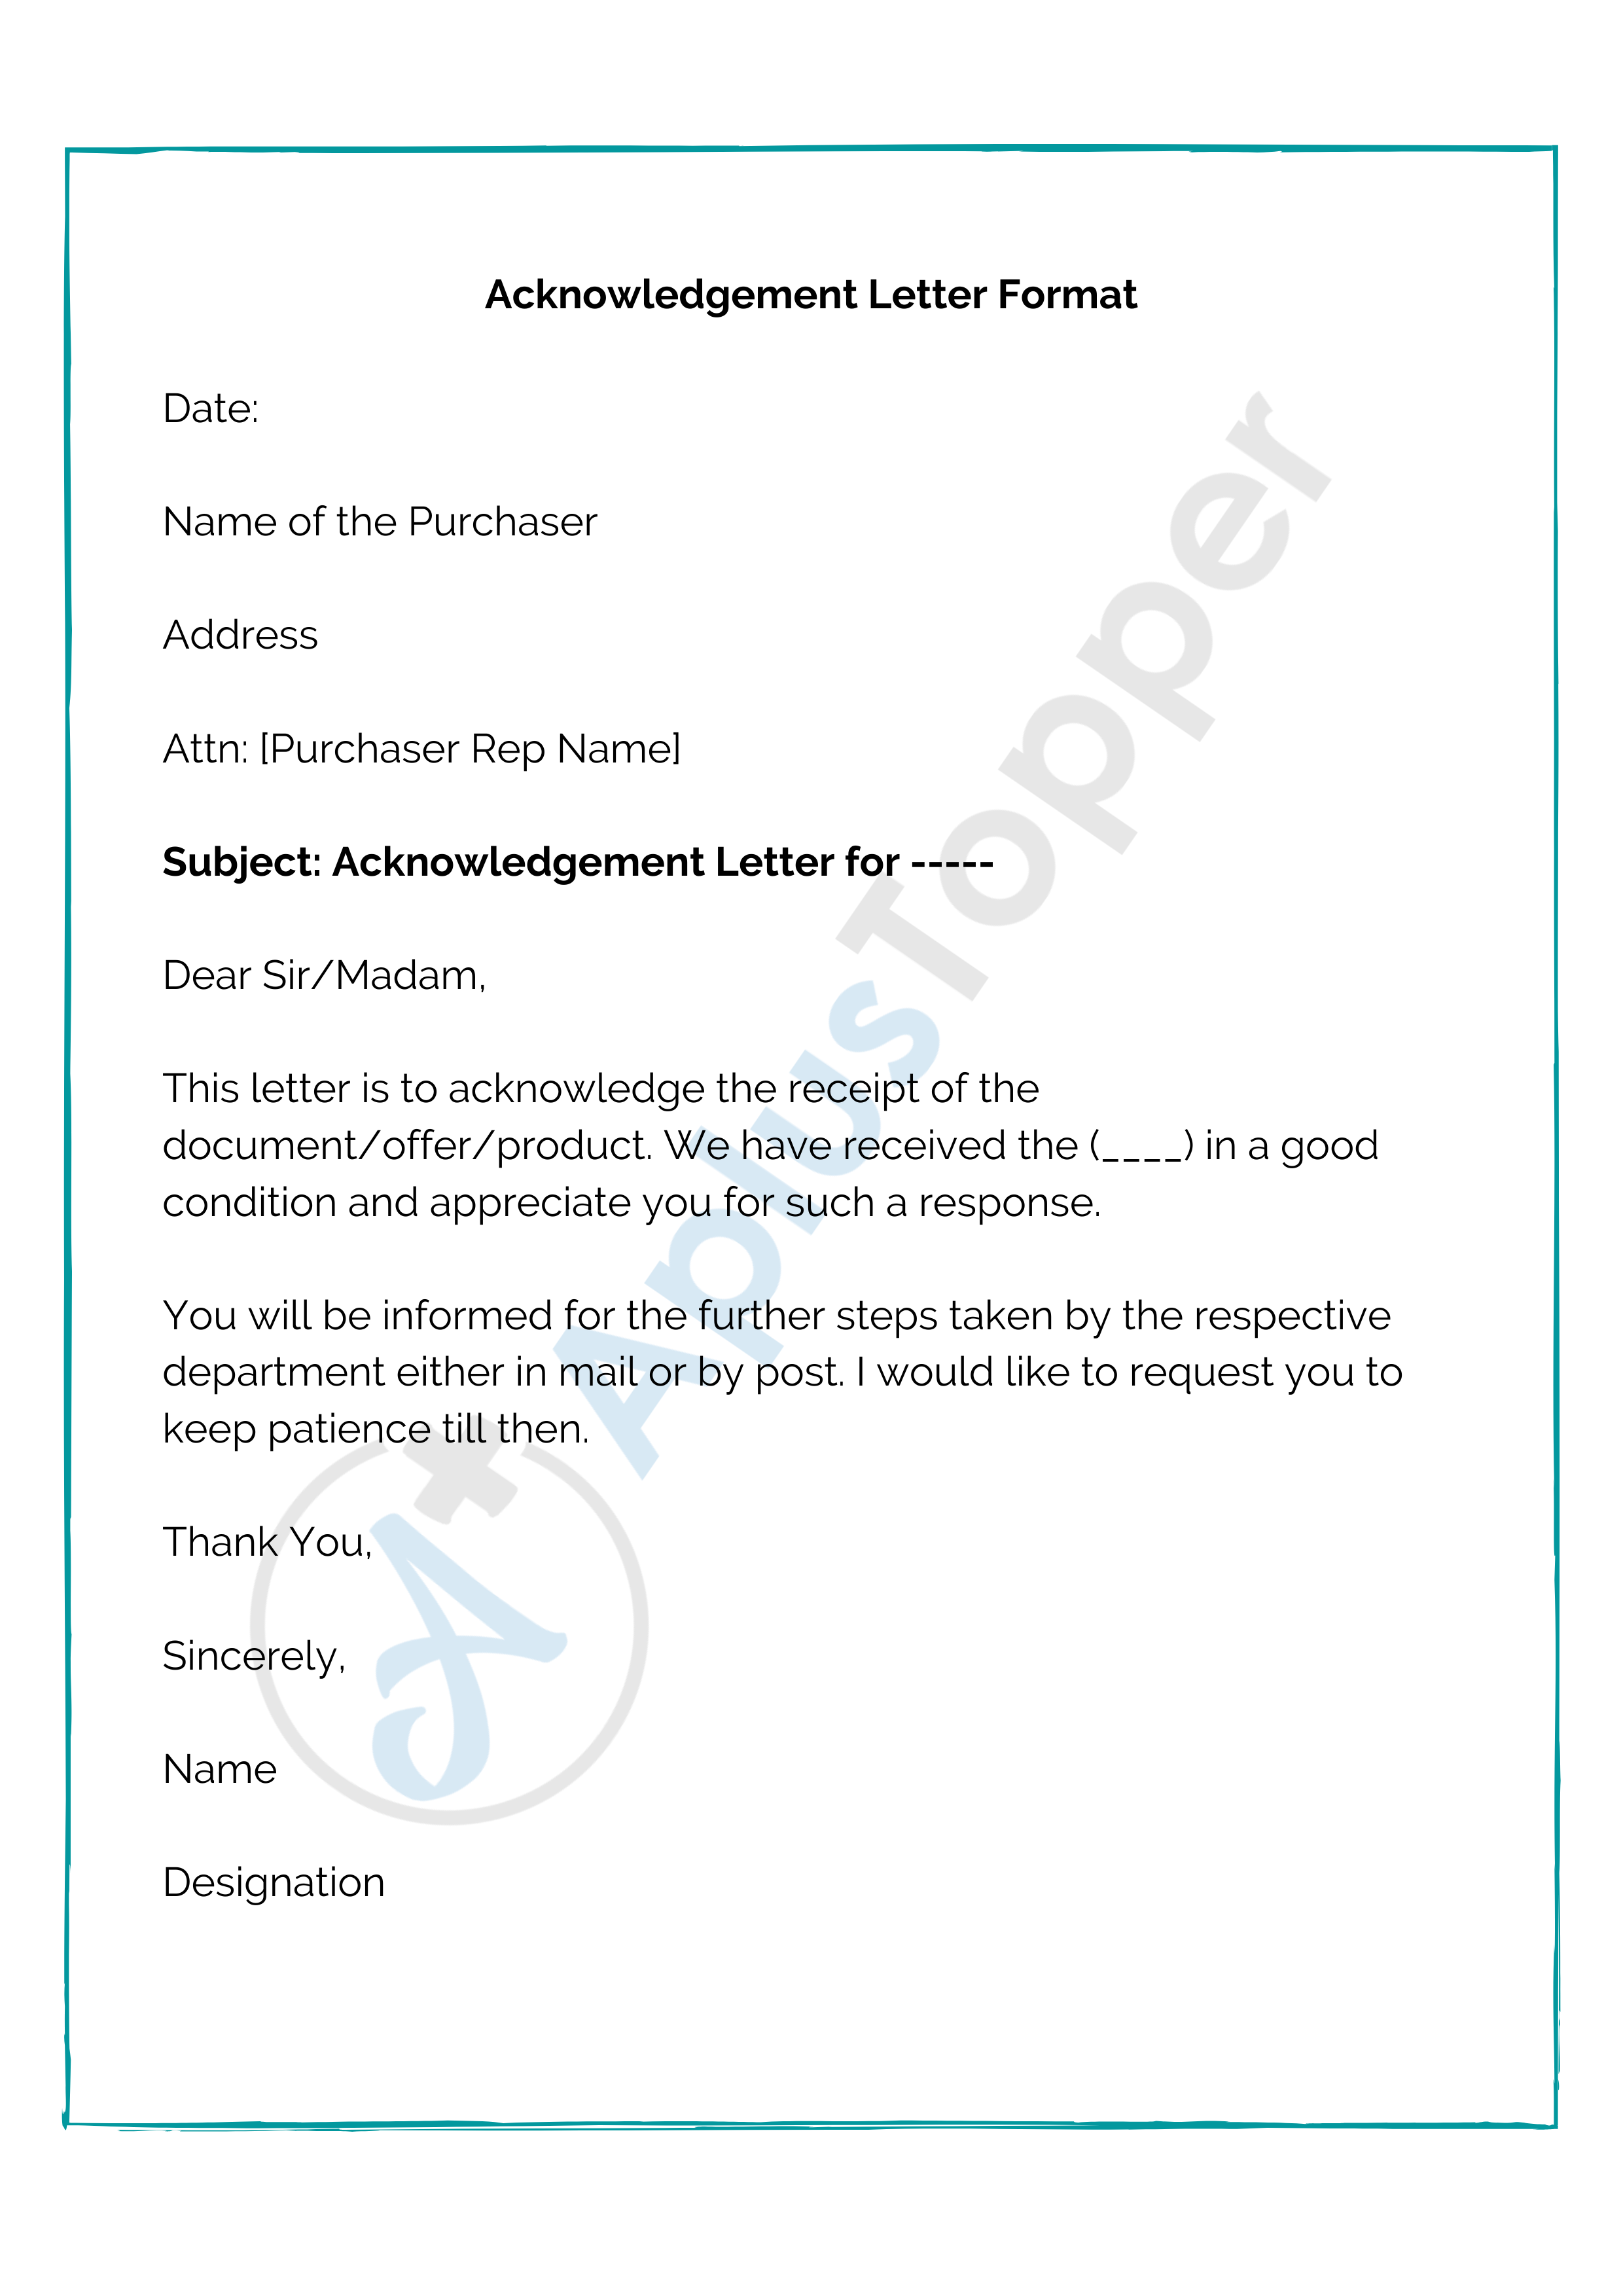 Acknowledgement Letter  Format, Samples, Template, How To Write